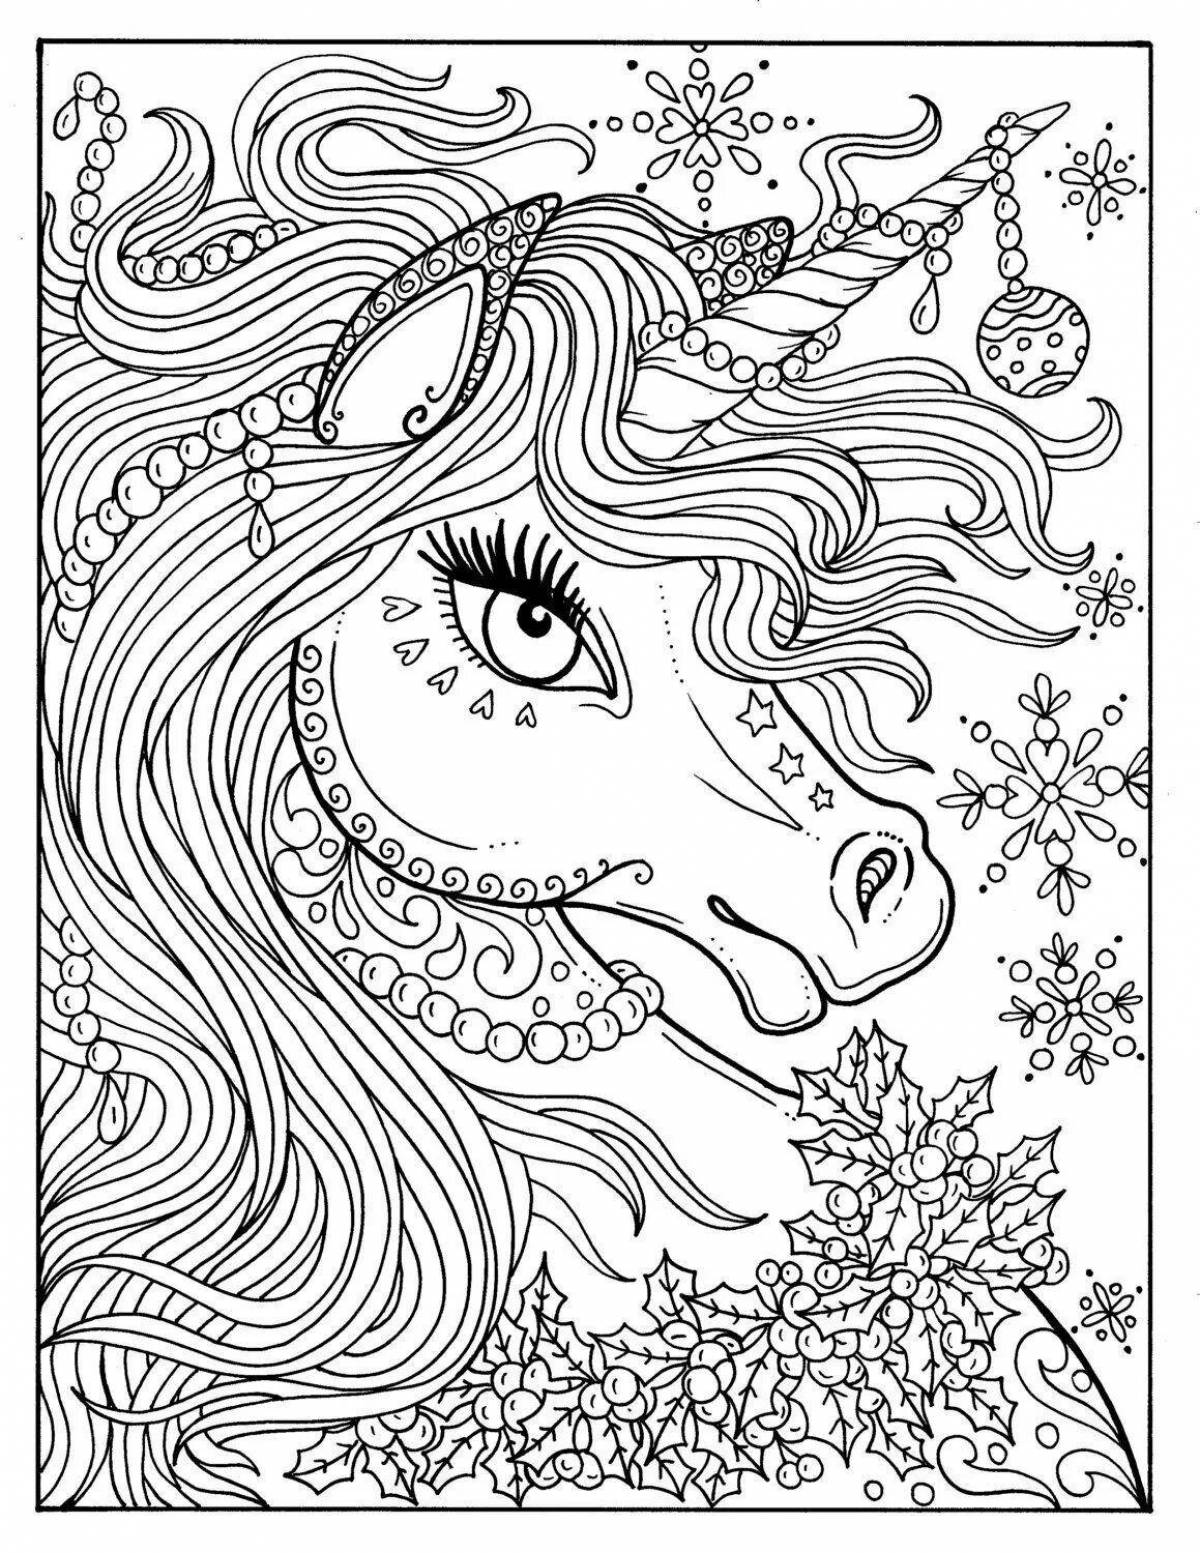 Great coloring book for girls 7 years old